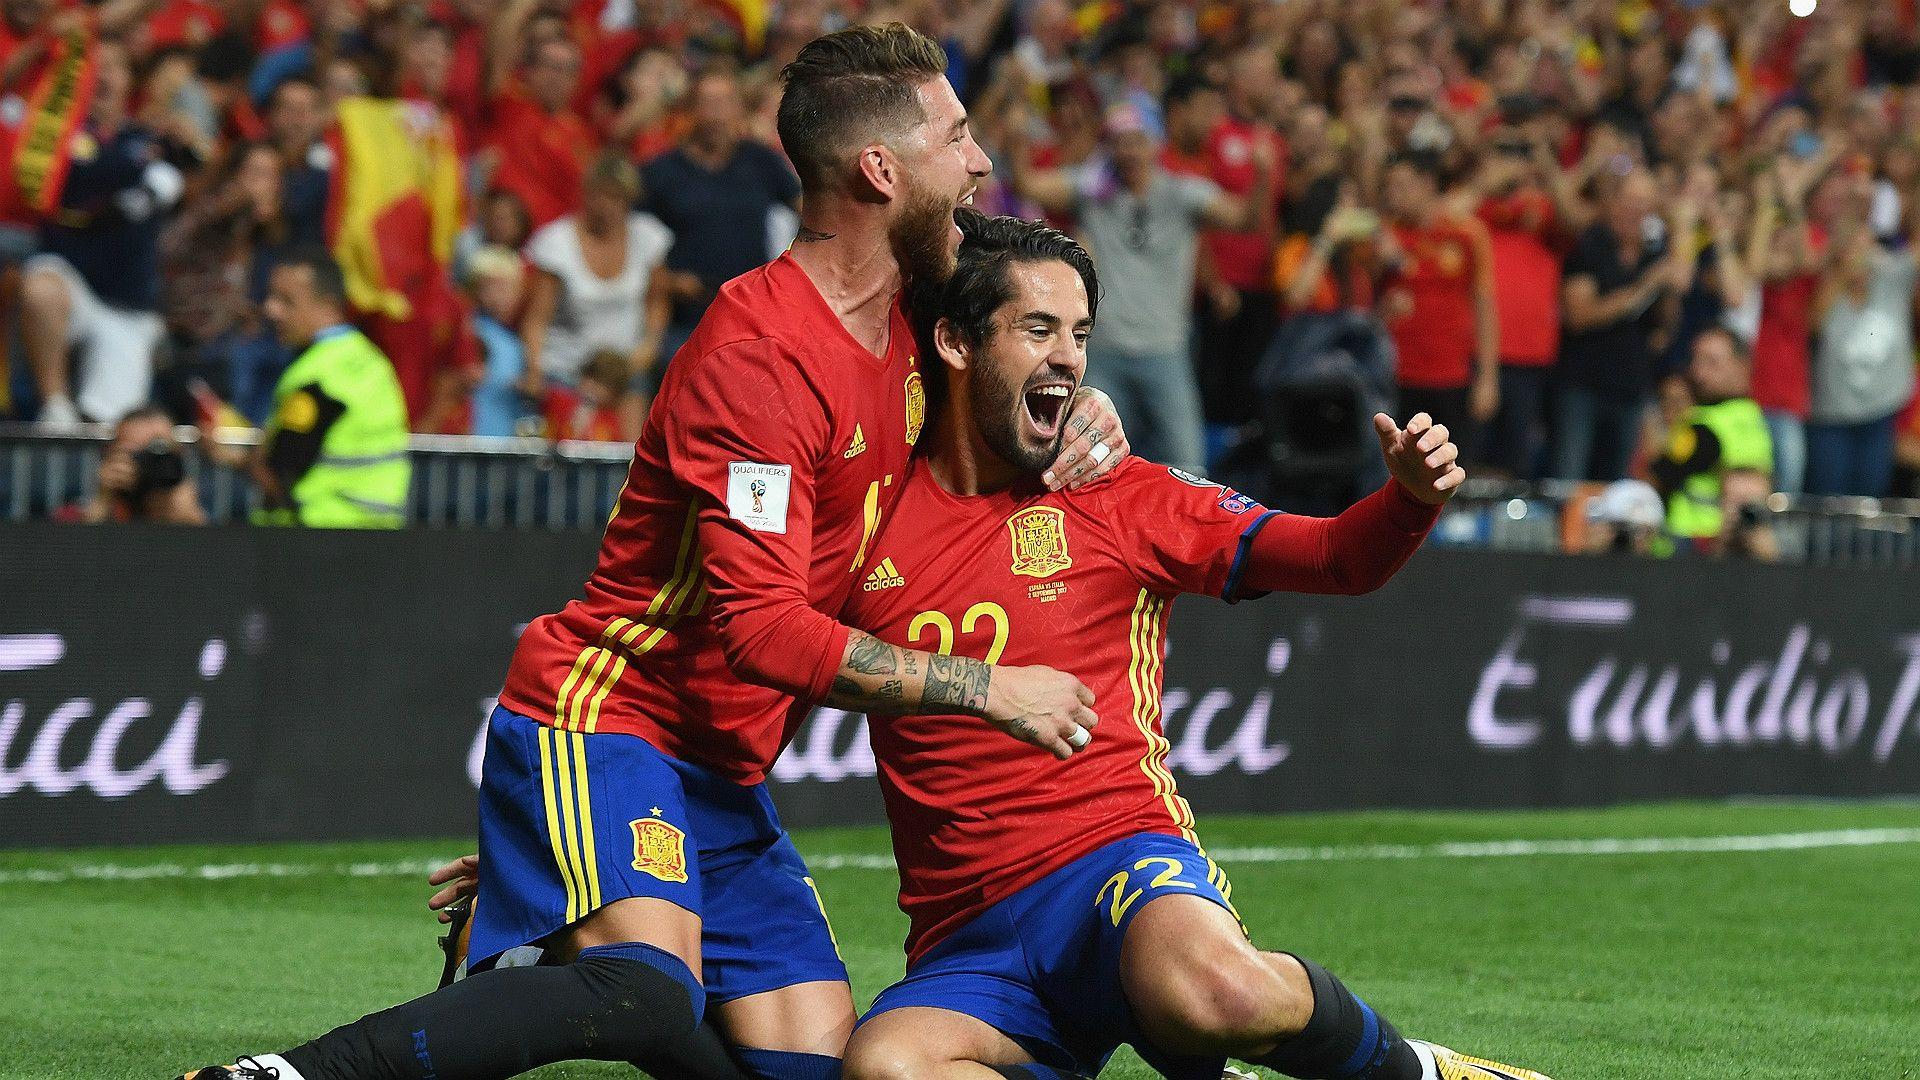 Real Madrid stars Isco and Asensio can lead reborn Spain to